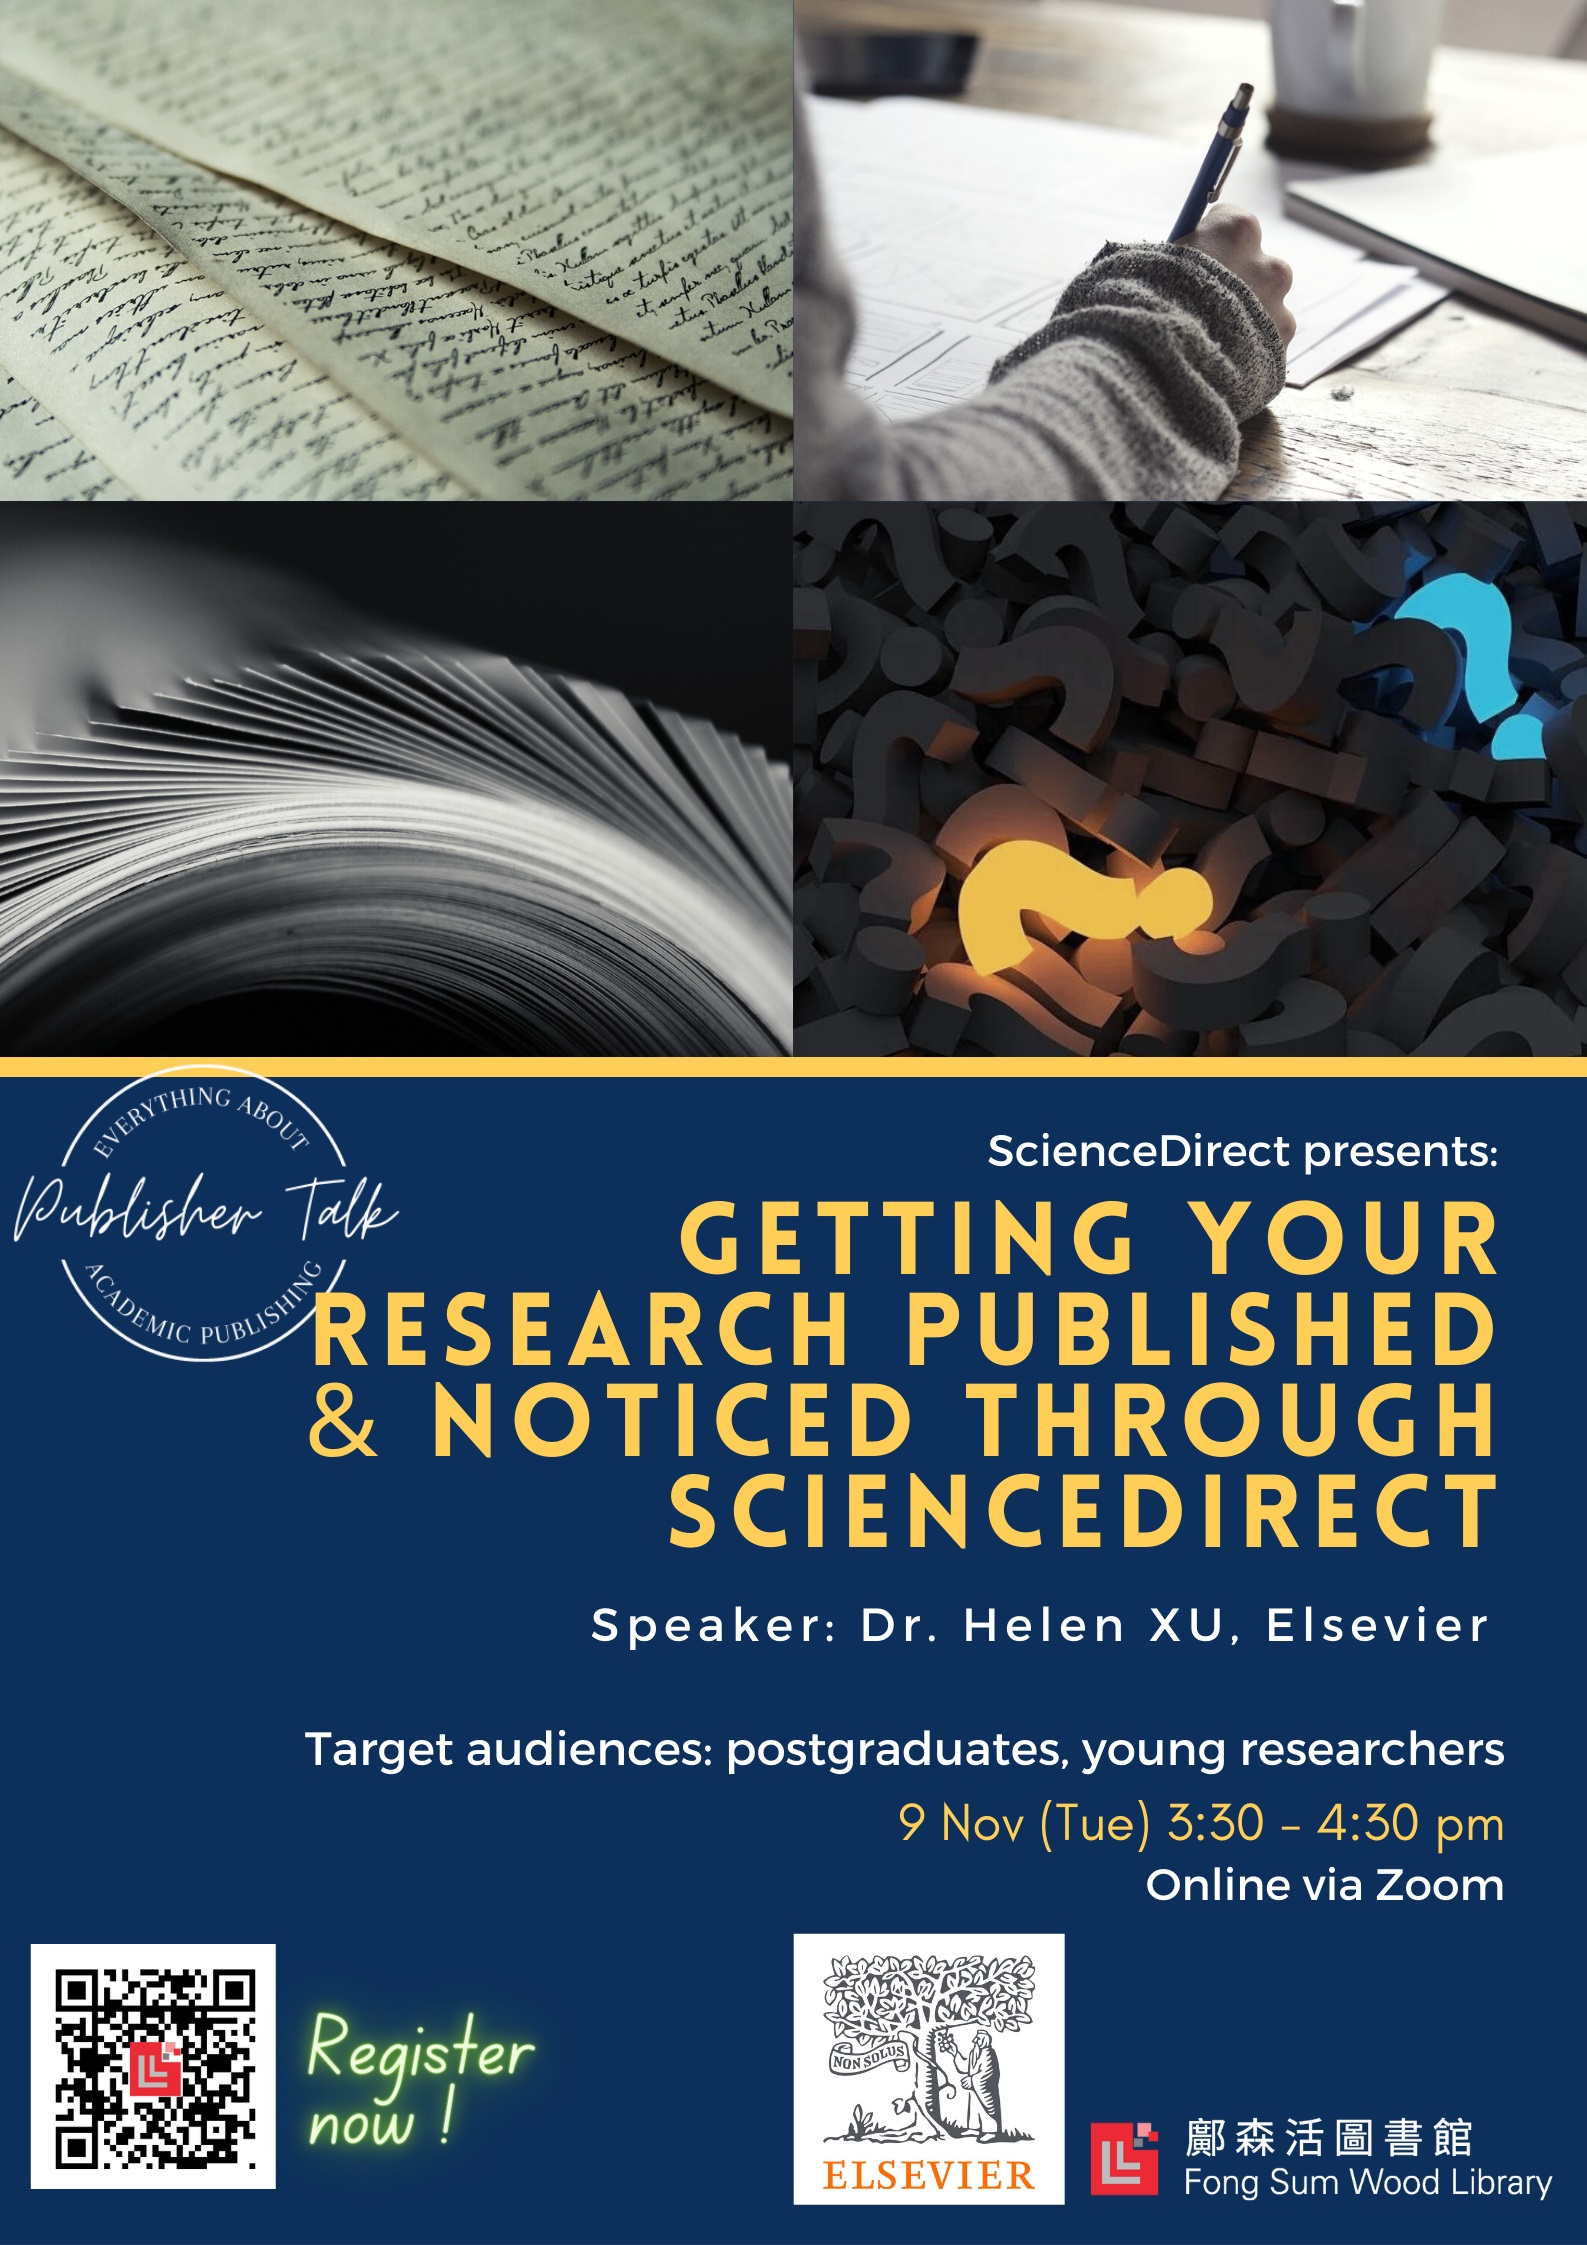 Getting your Research Published and then Noticed through ScienceDirect